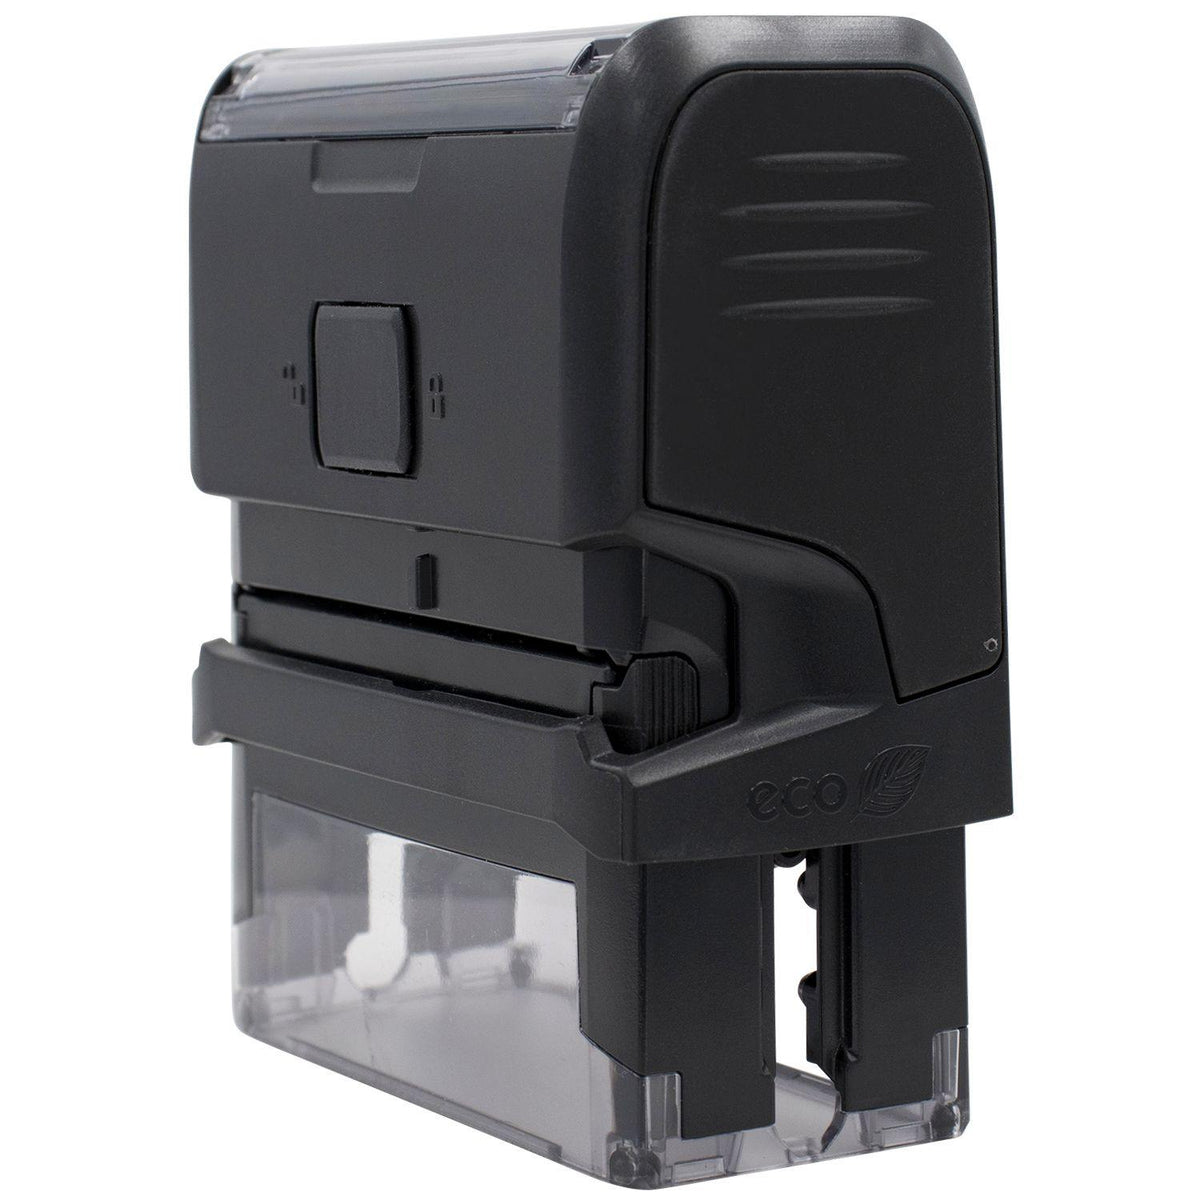 Side View of Large Self-Inking Contact Tracing Stamp at an Angle